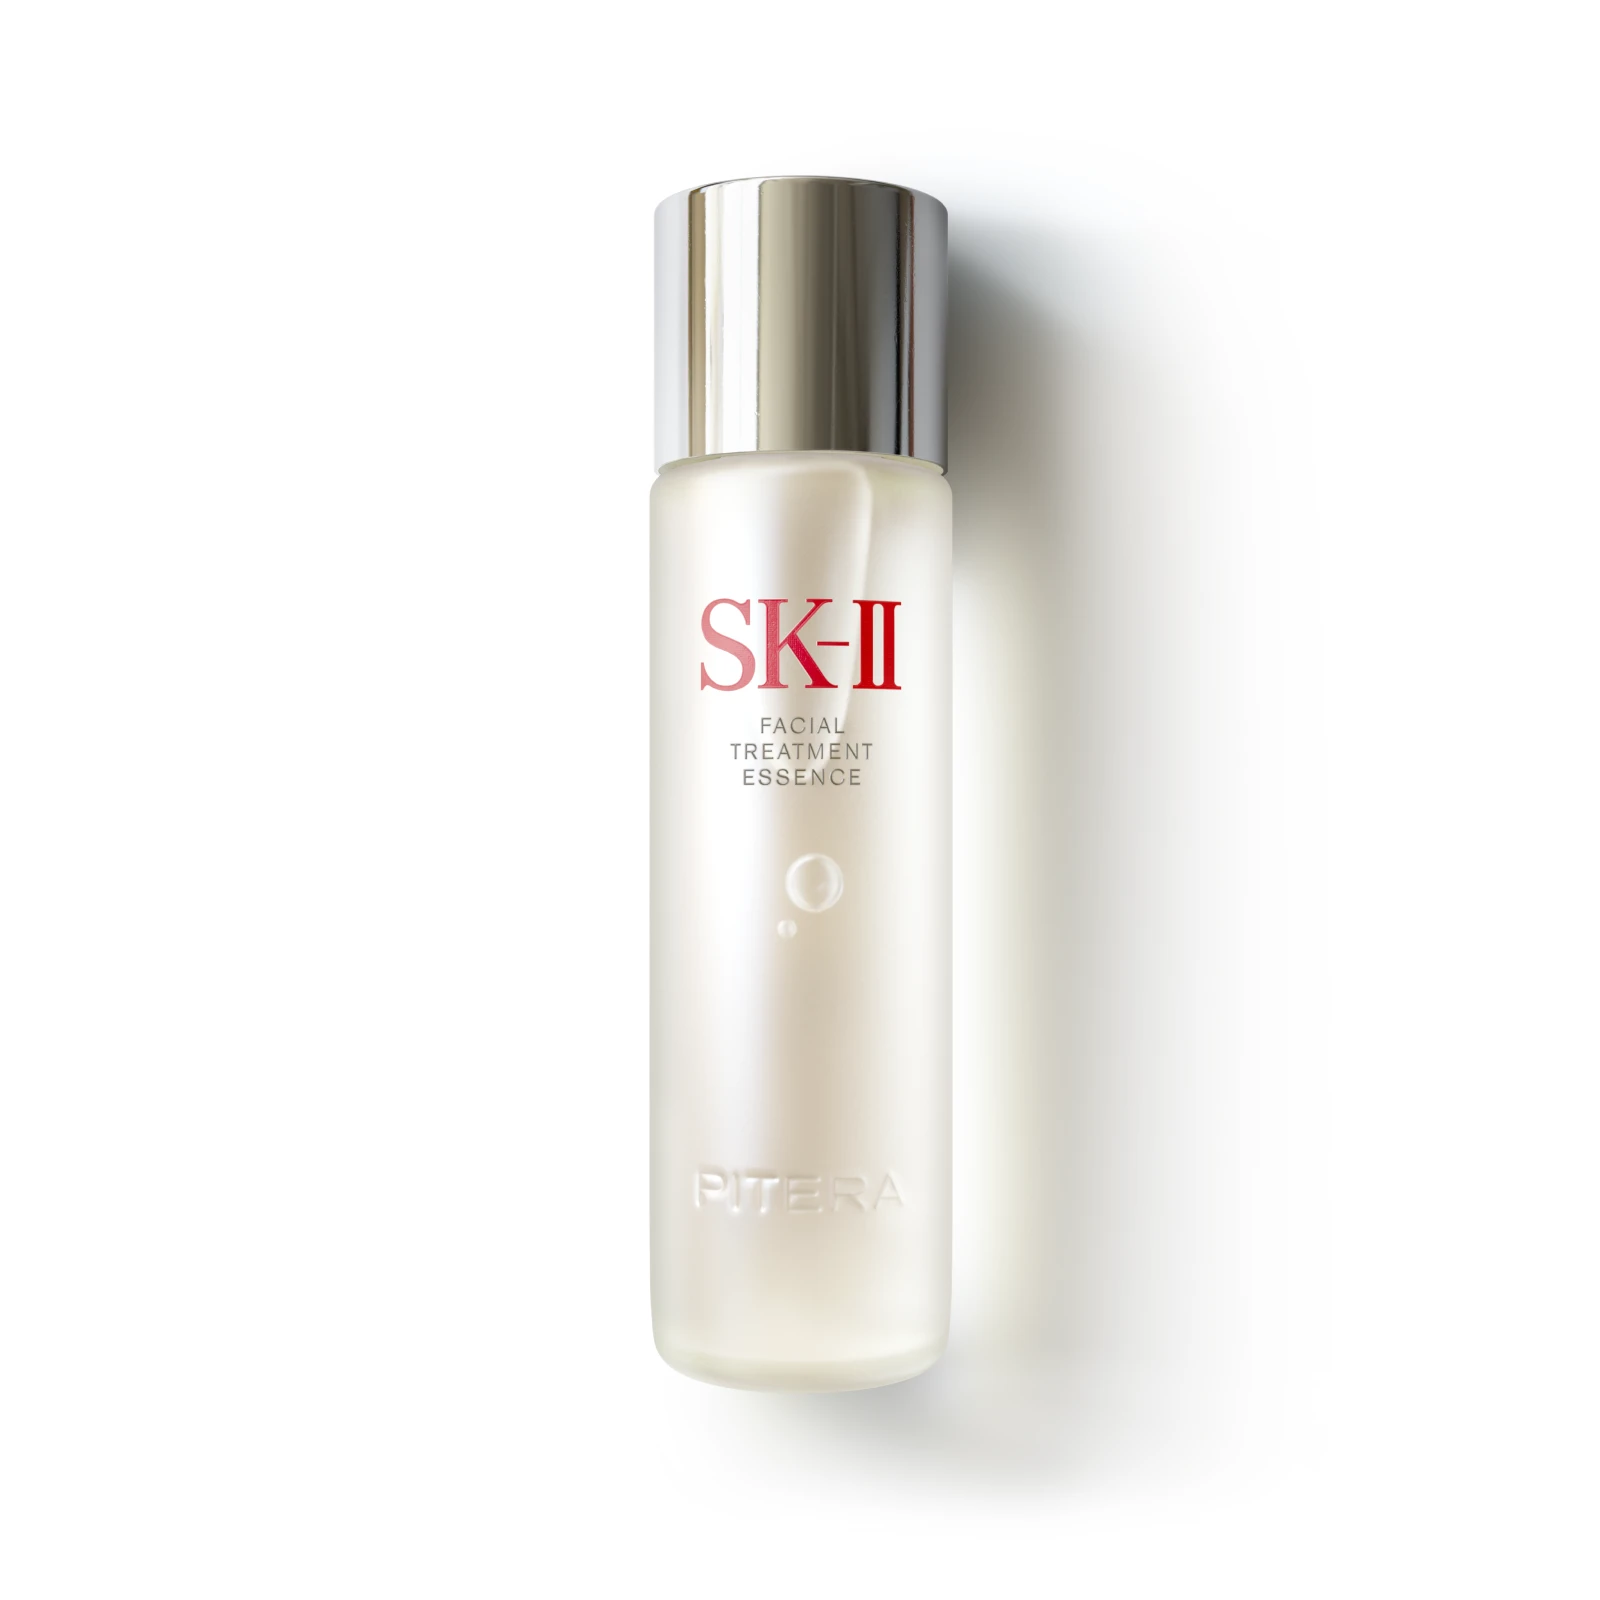 SK-II Facial Treatment Essence for glowing skin